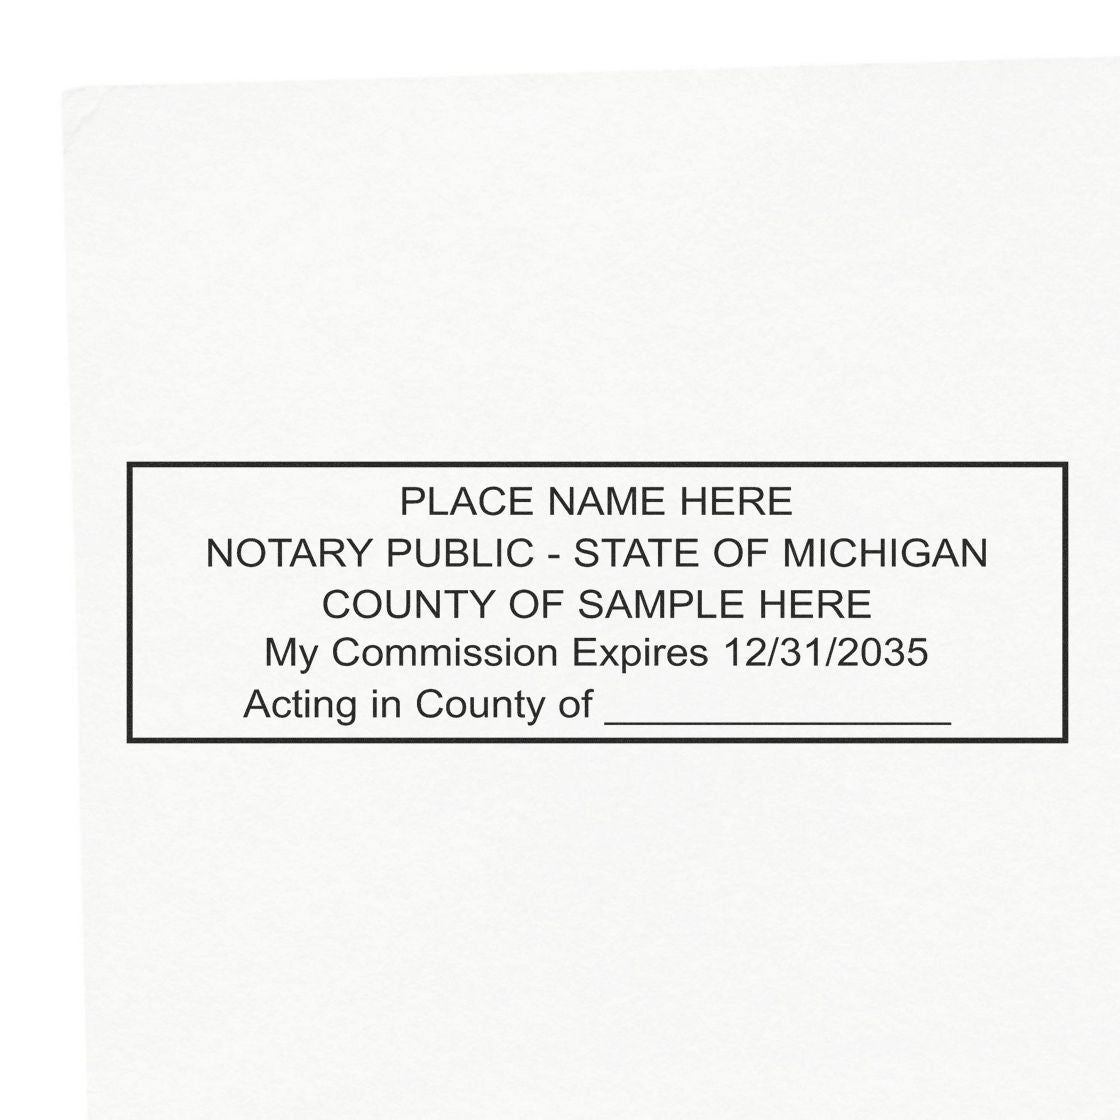 PSI Michigan Notary Stamp in use photo showing a stamped imprint of the PSI Michigan Notary Stamp